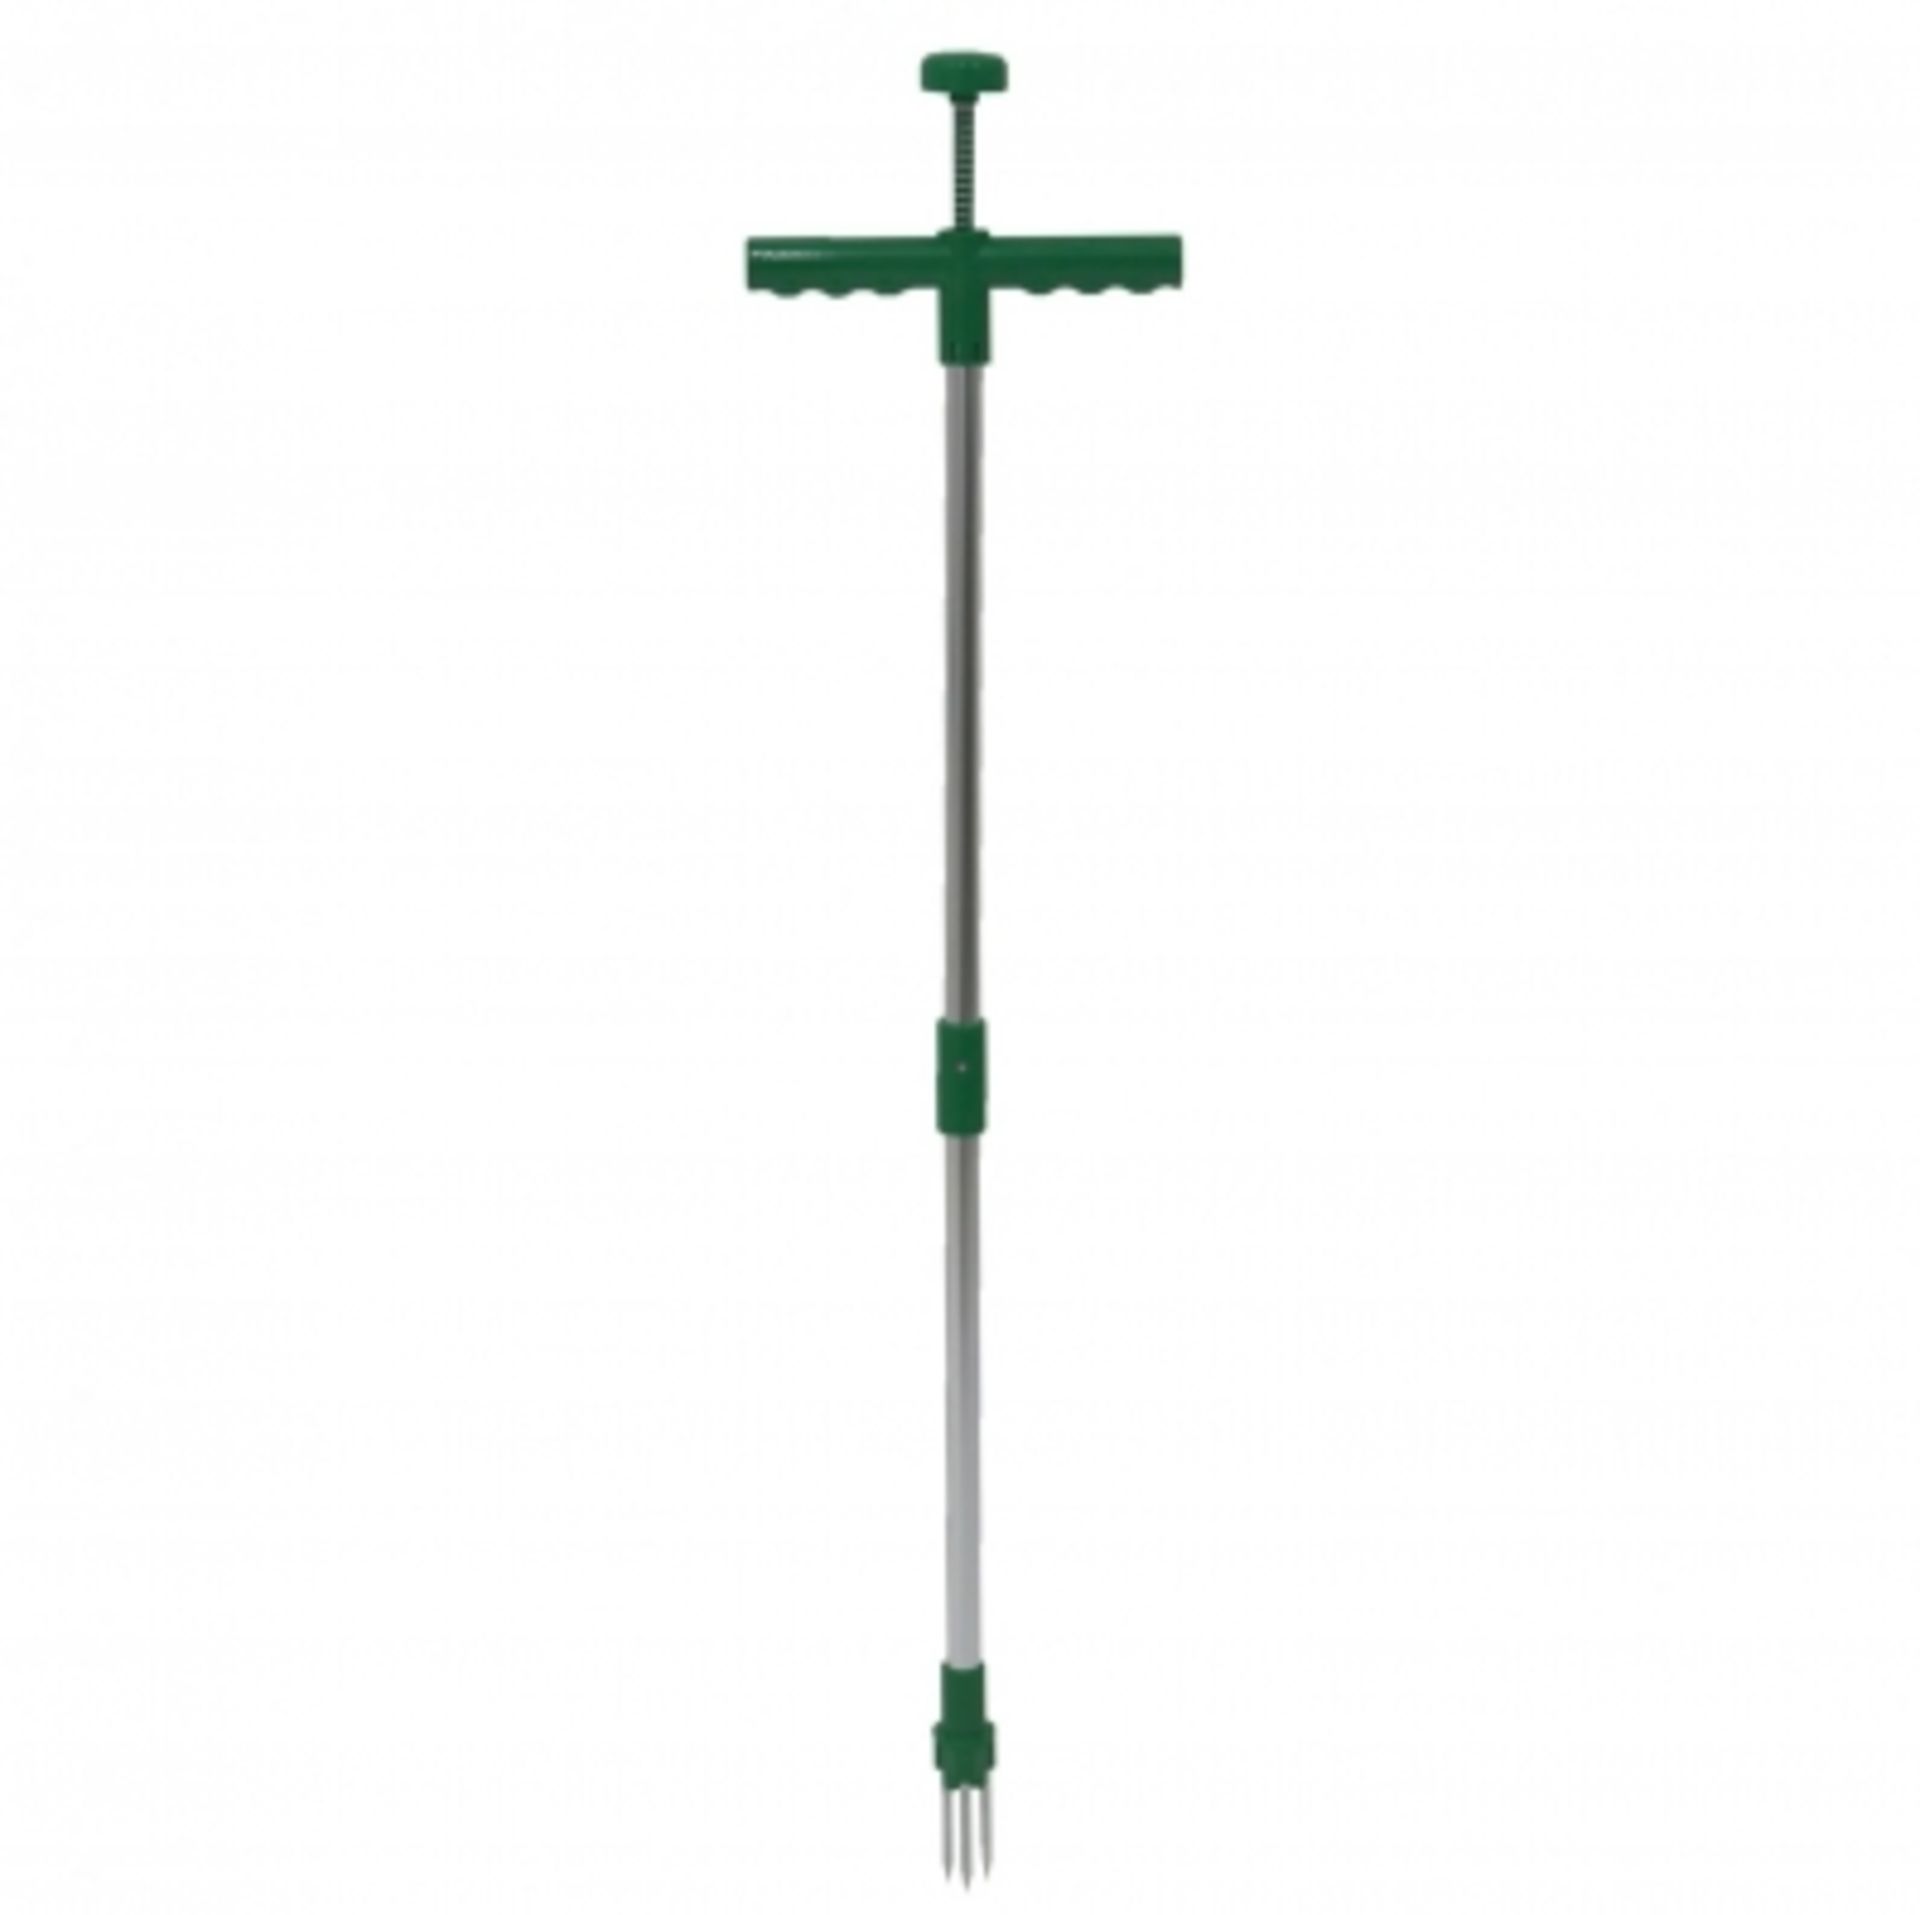 (EE478) Weed Puller Twister Remover Weeder Manual Weeding Garden Tool The weed remover is th...